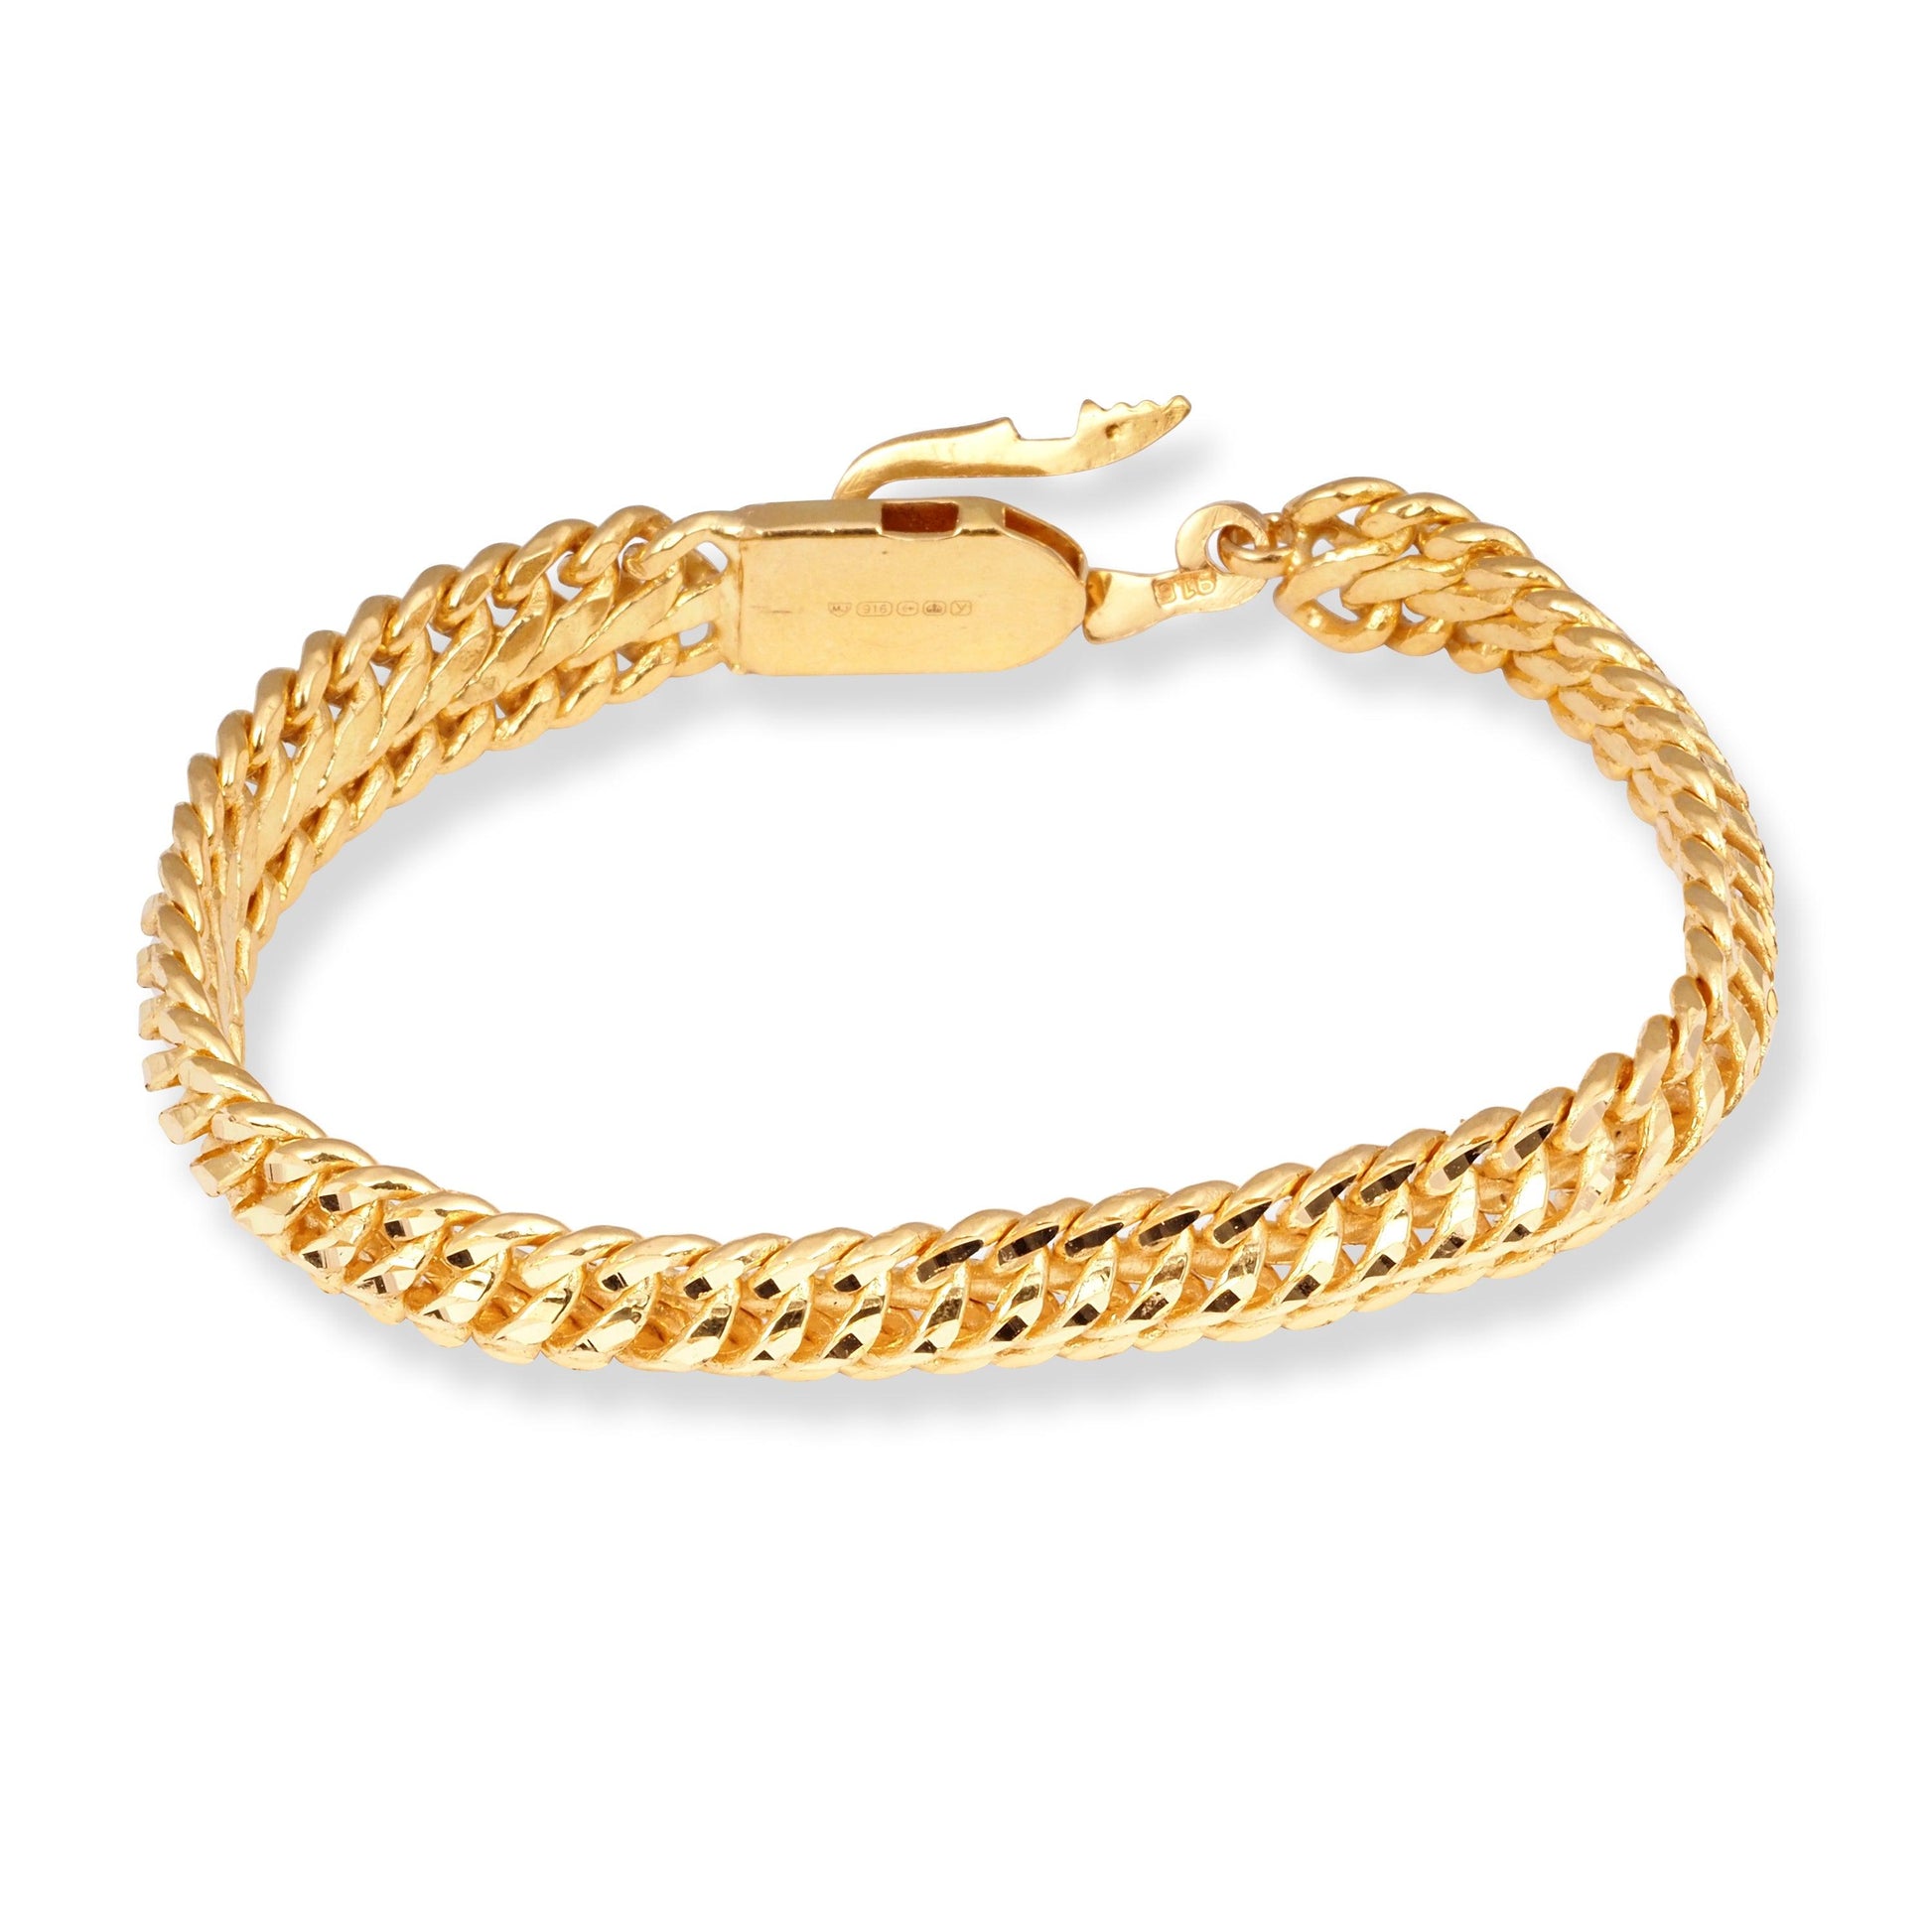 22ct Indian Gold Intertwine Gents Bracelet with U Push Clasp GBR-8328 - Minar Jewellers